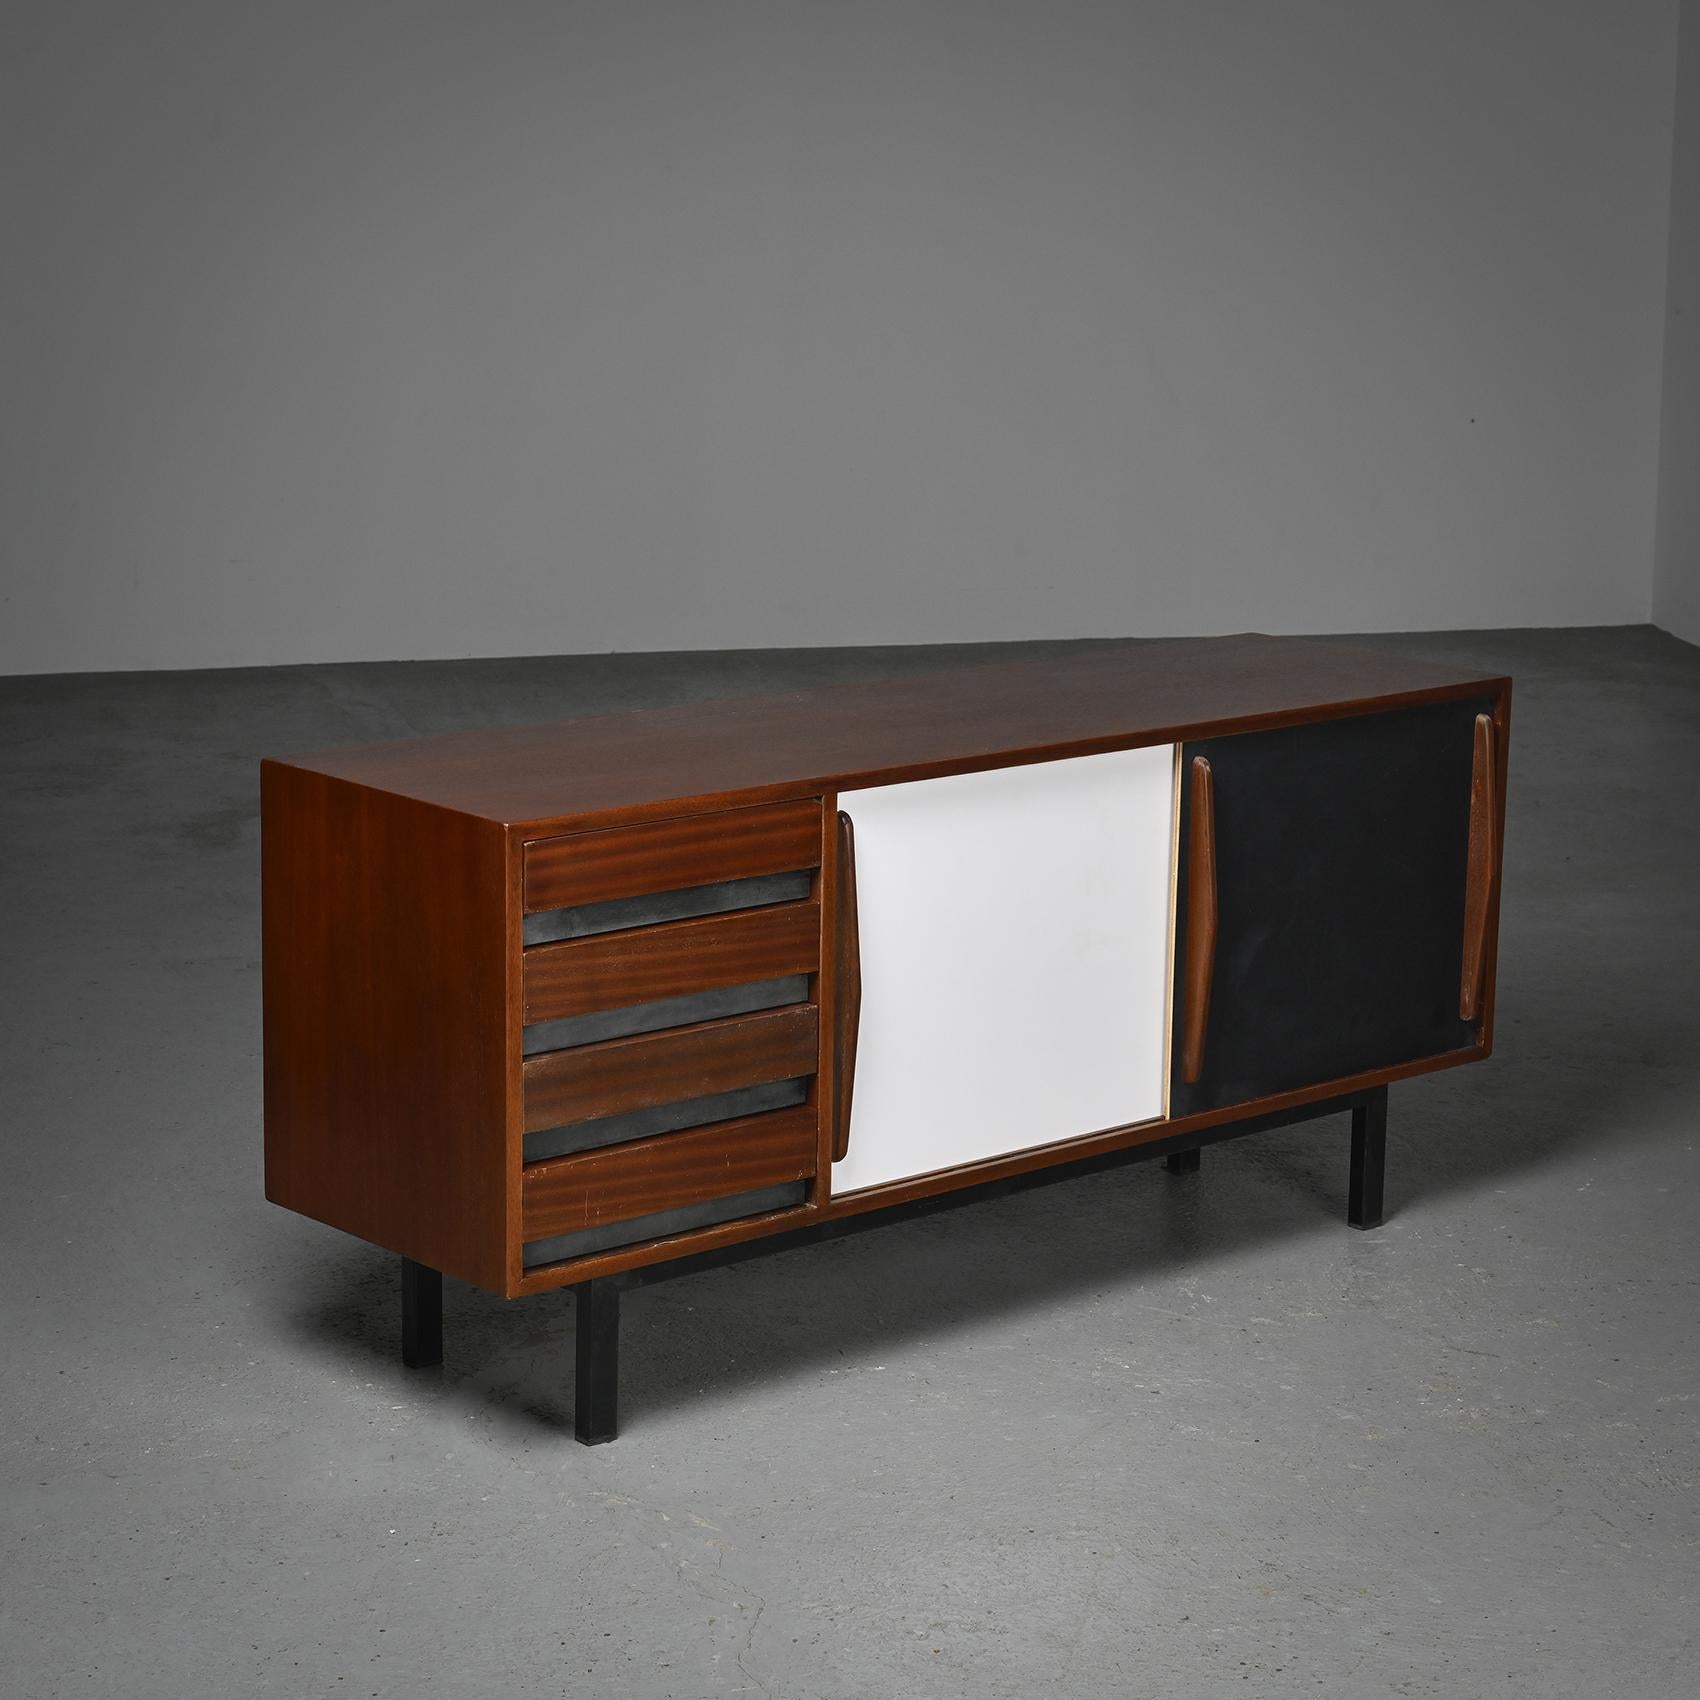  A sideboard by Charlotte Perriand, from the Cansado mining city in Mauritania. 

Structure in mahogany veneer, with two black and white laminate sliding doors, all resting on a black lacquered base. 

Manufacturer: Steph Simon, 1956-1974.